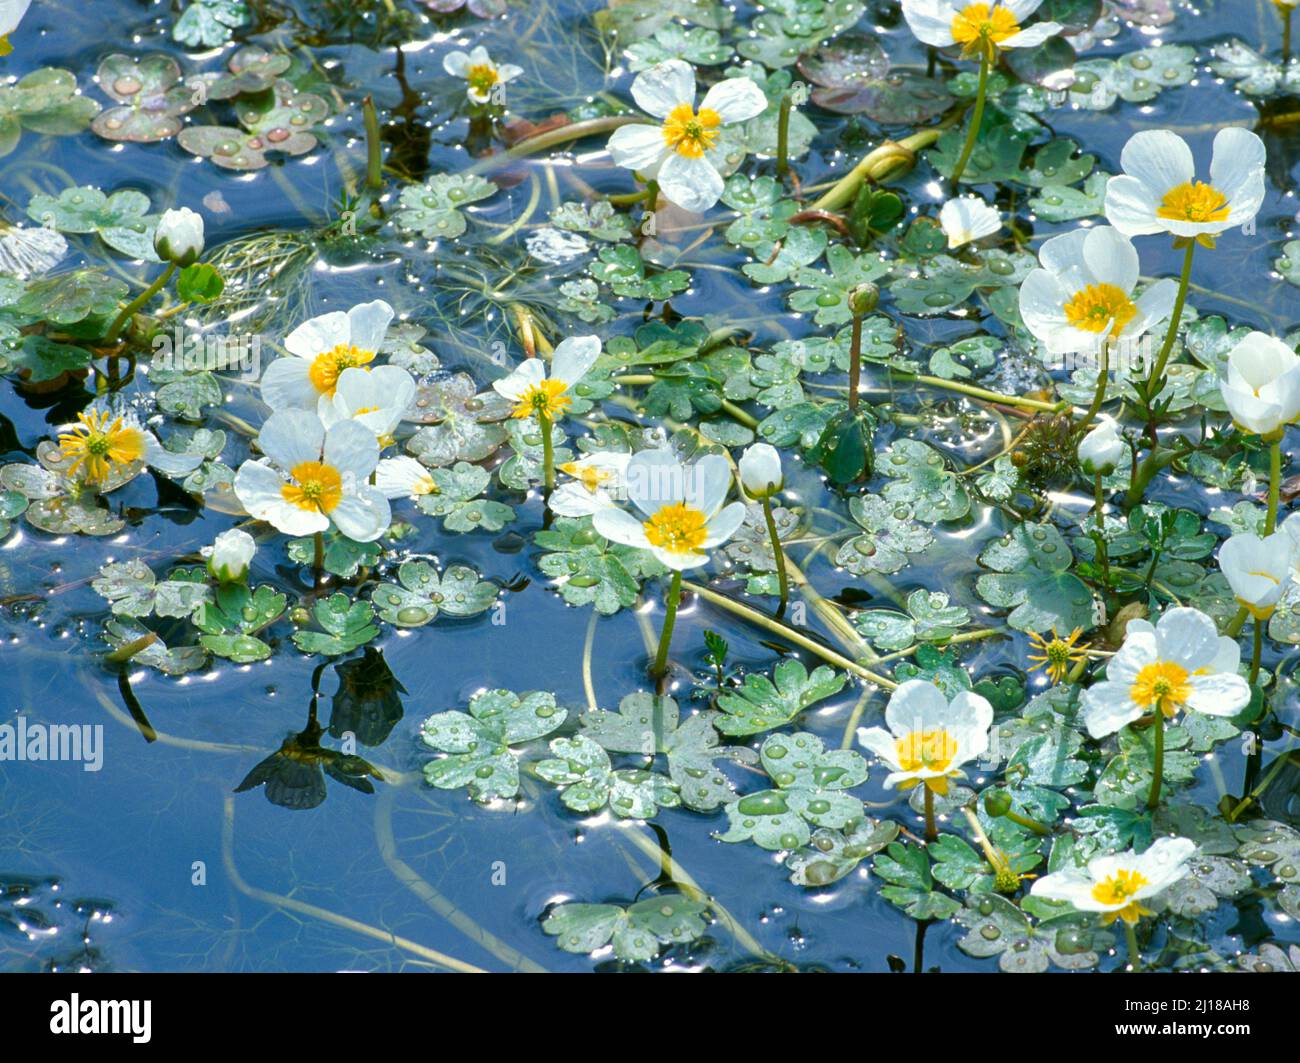 Water Crowfoot, after the rain, Stock Photo